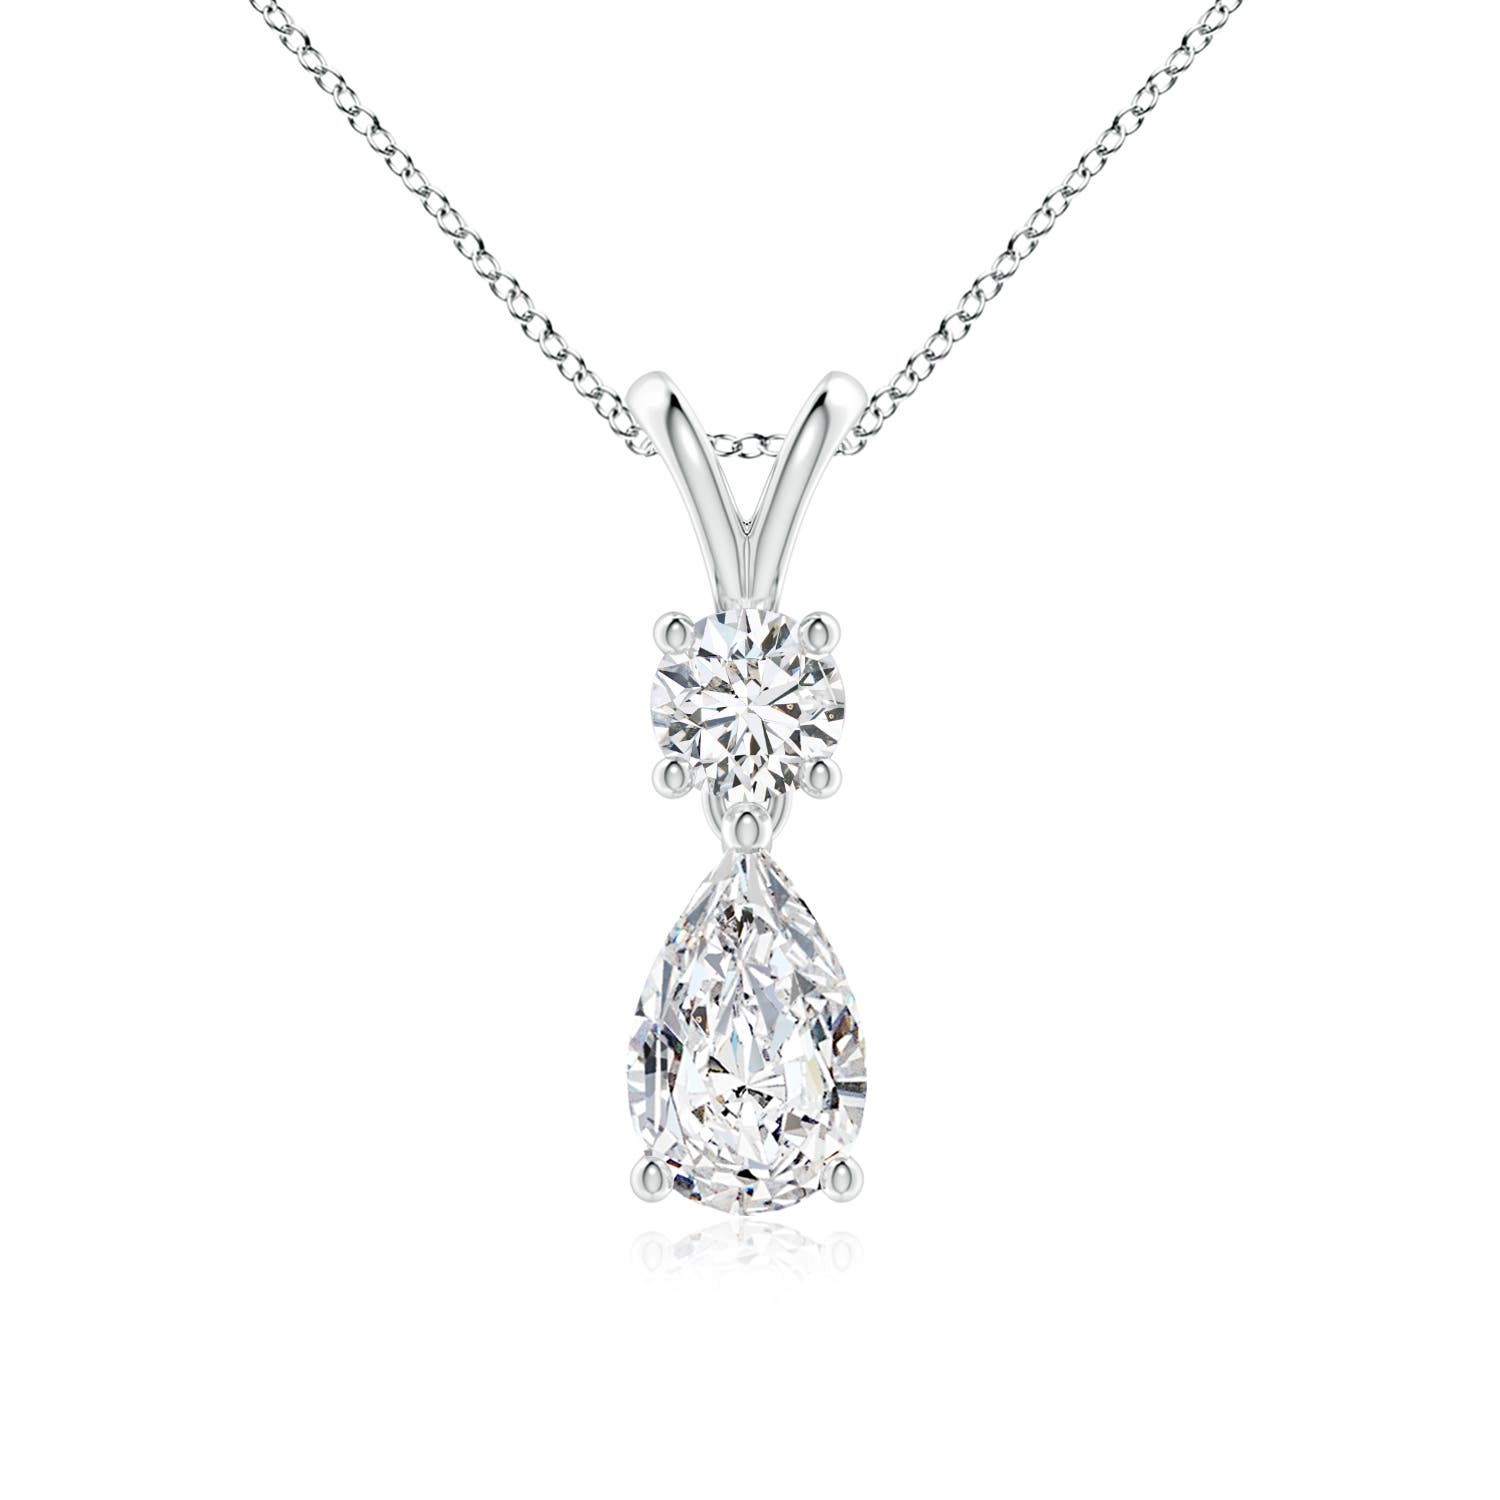 H, SI2 / 0.99 CT / 14 KT White Gold